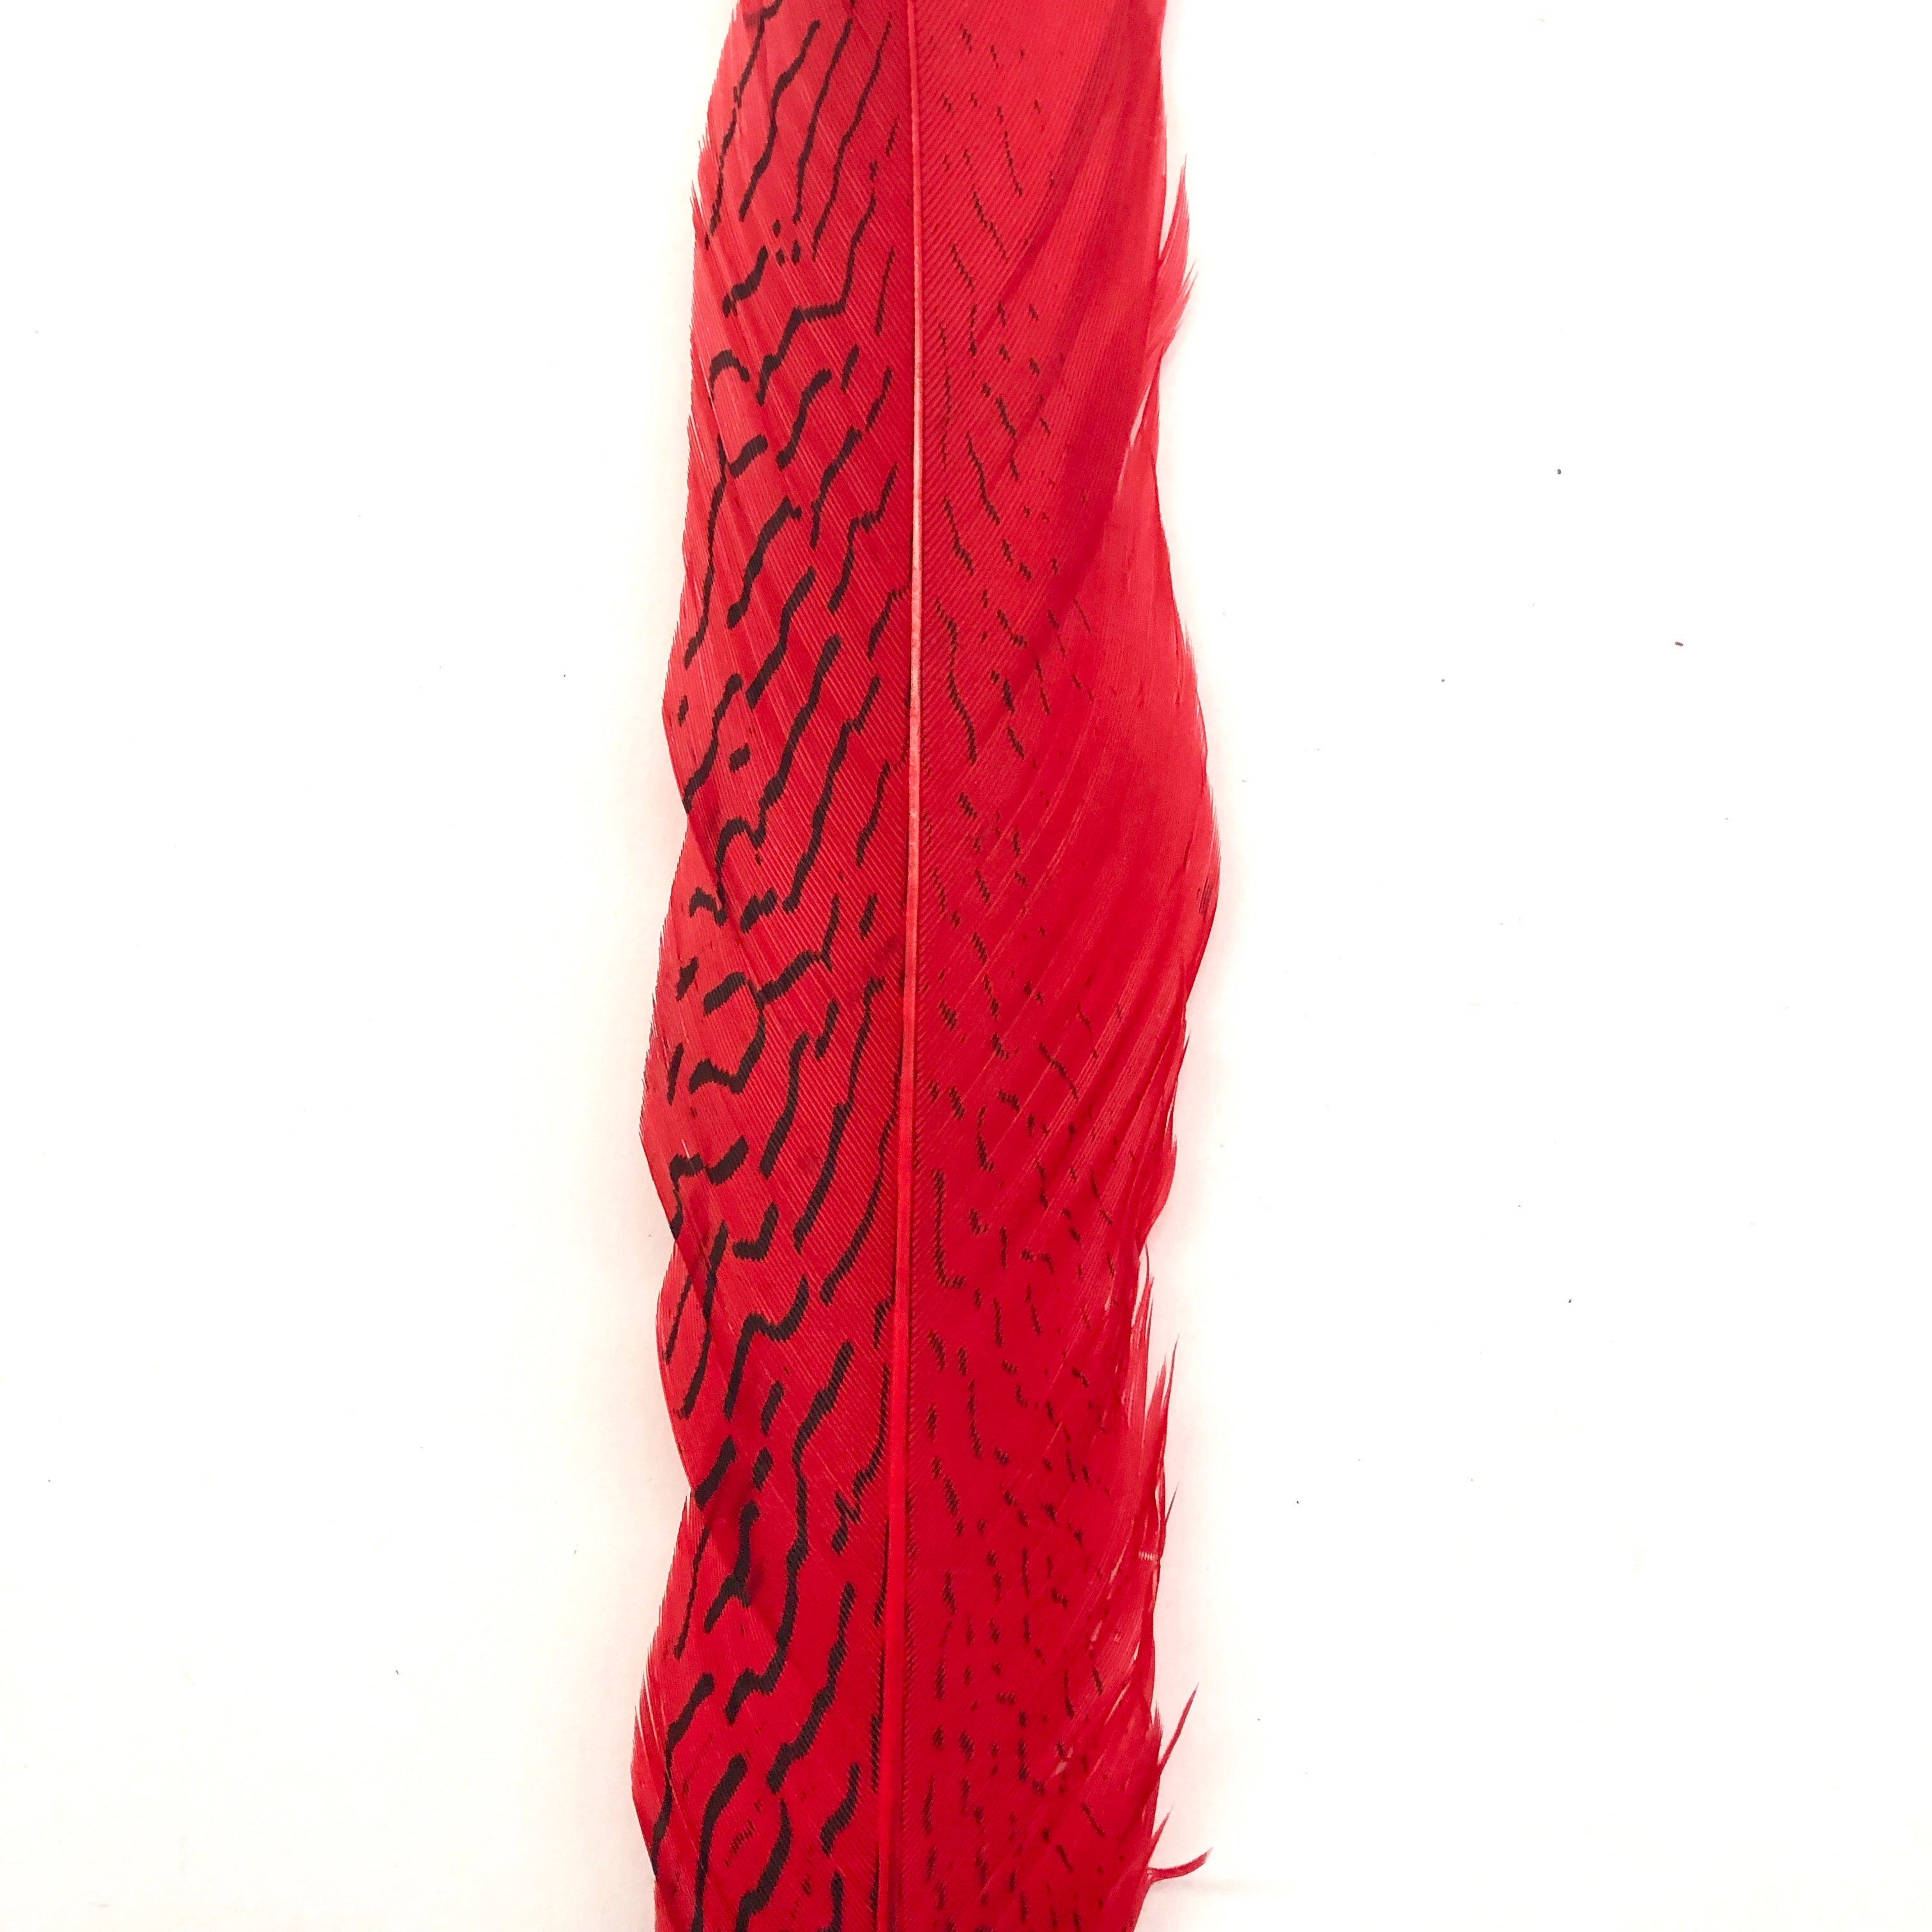 10" To 20" Silver Pheasant Tail Feather - Red ((SECONDS))